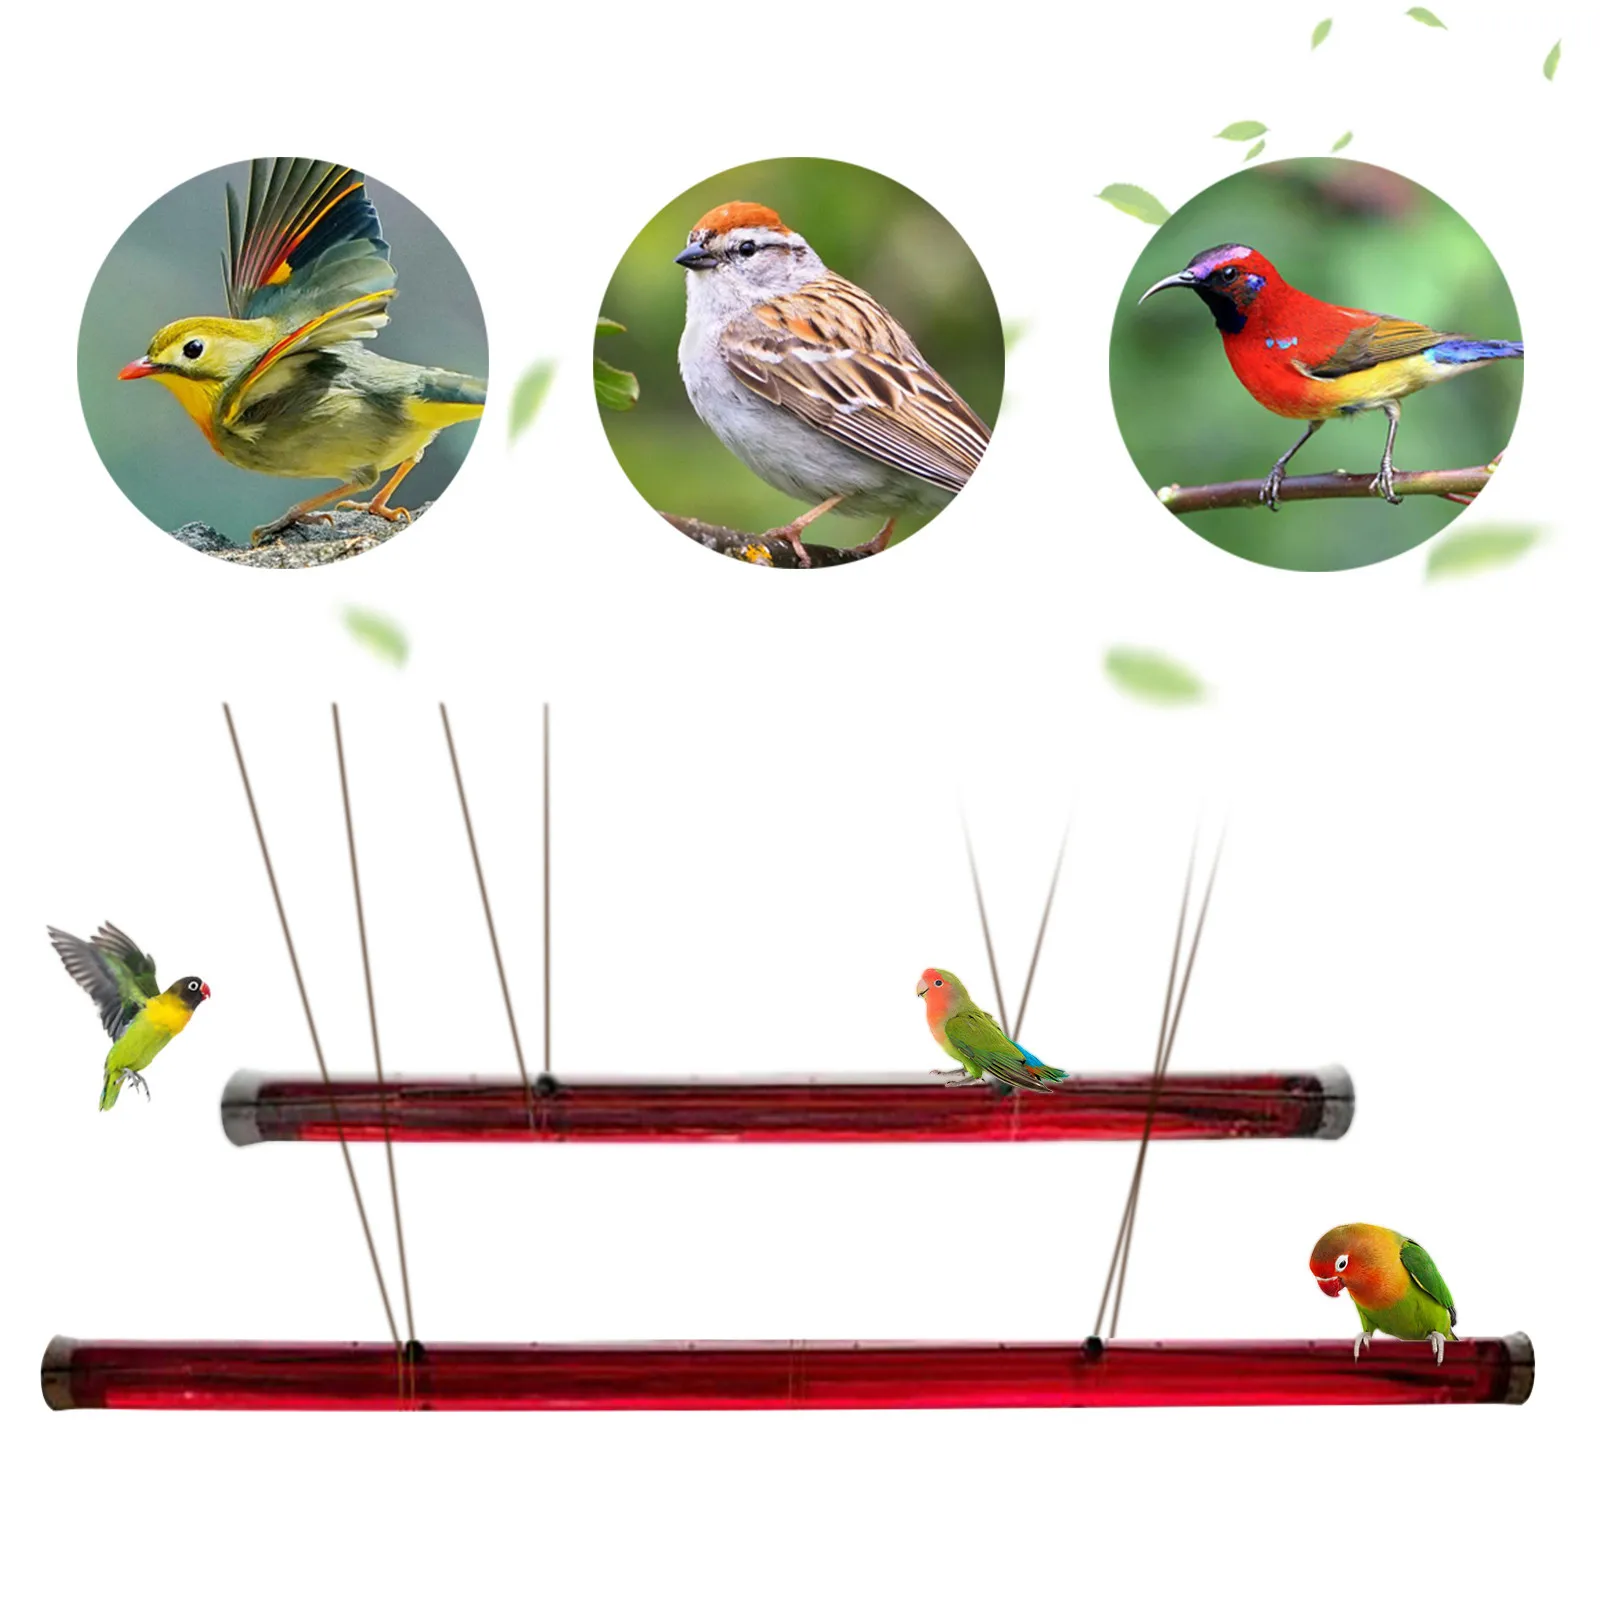 

Hummingbird Feeder With Hole Feeding Pipes Birds Easy To Use Red Hanging Long Tube Bird Feeder 60cm Anna's Best Gardening Tools